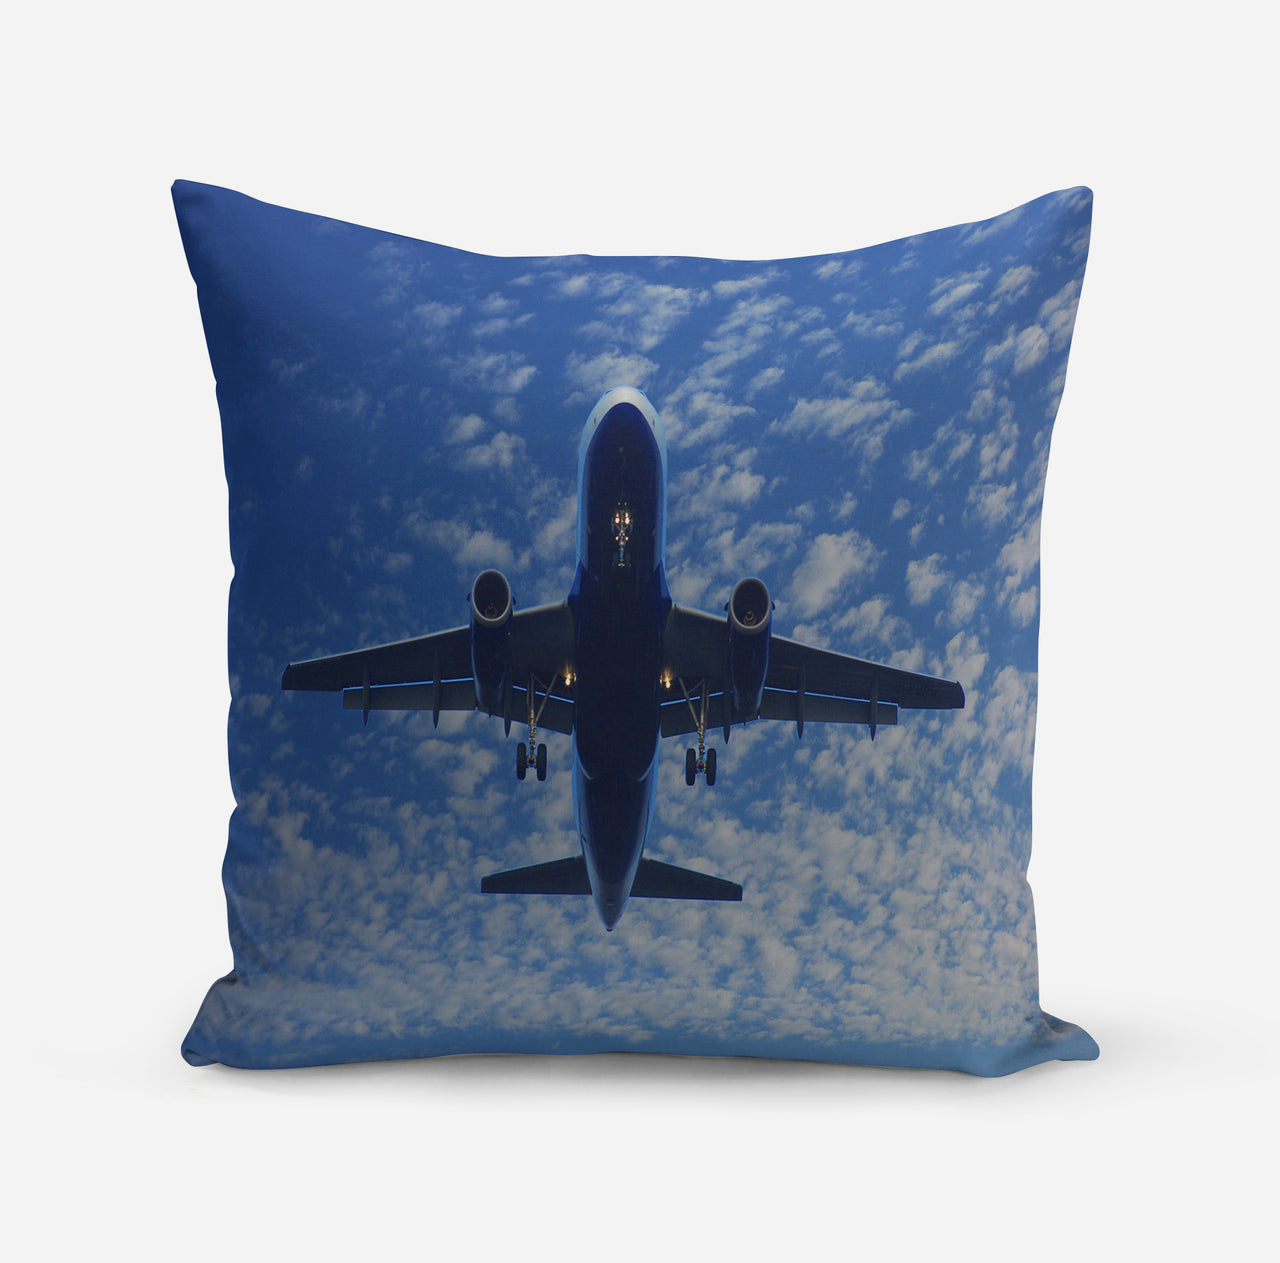 Airplane From Below Designed Pillows